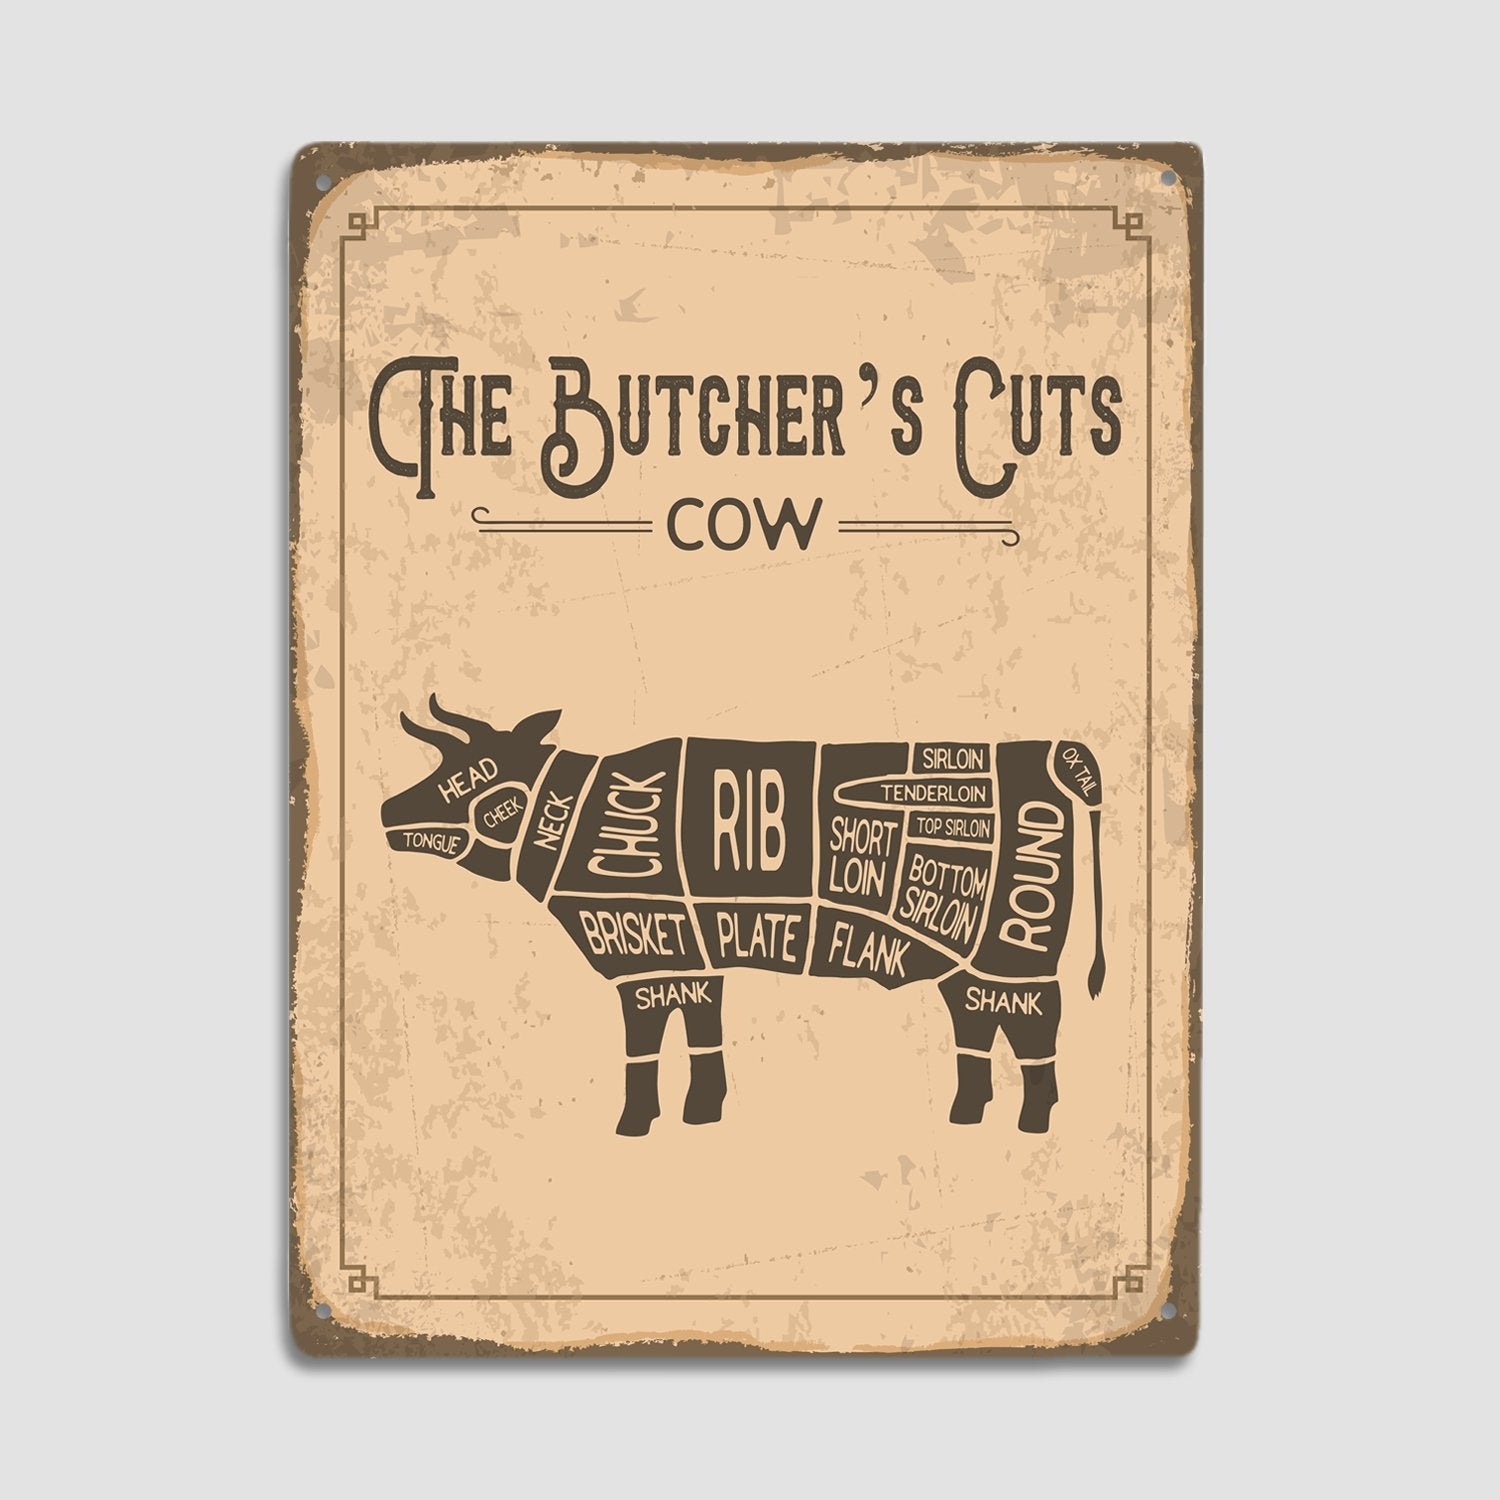 The Butcher's Cut's Cow, Metal Signs